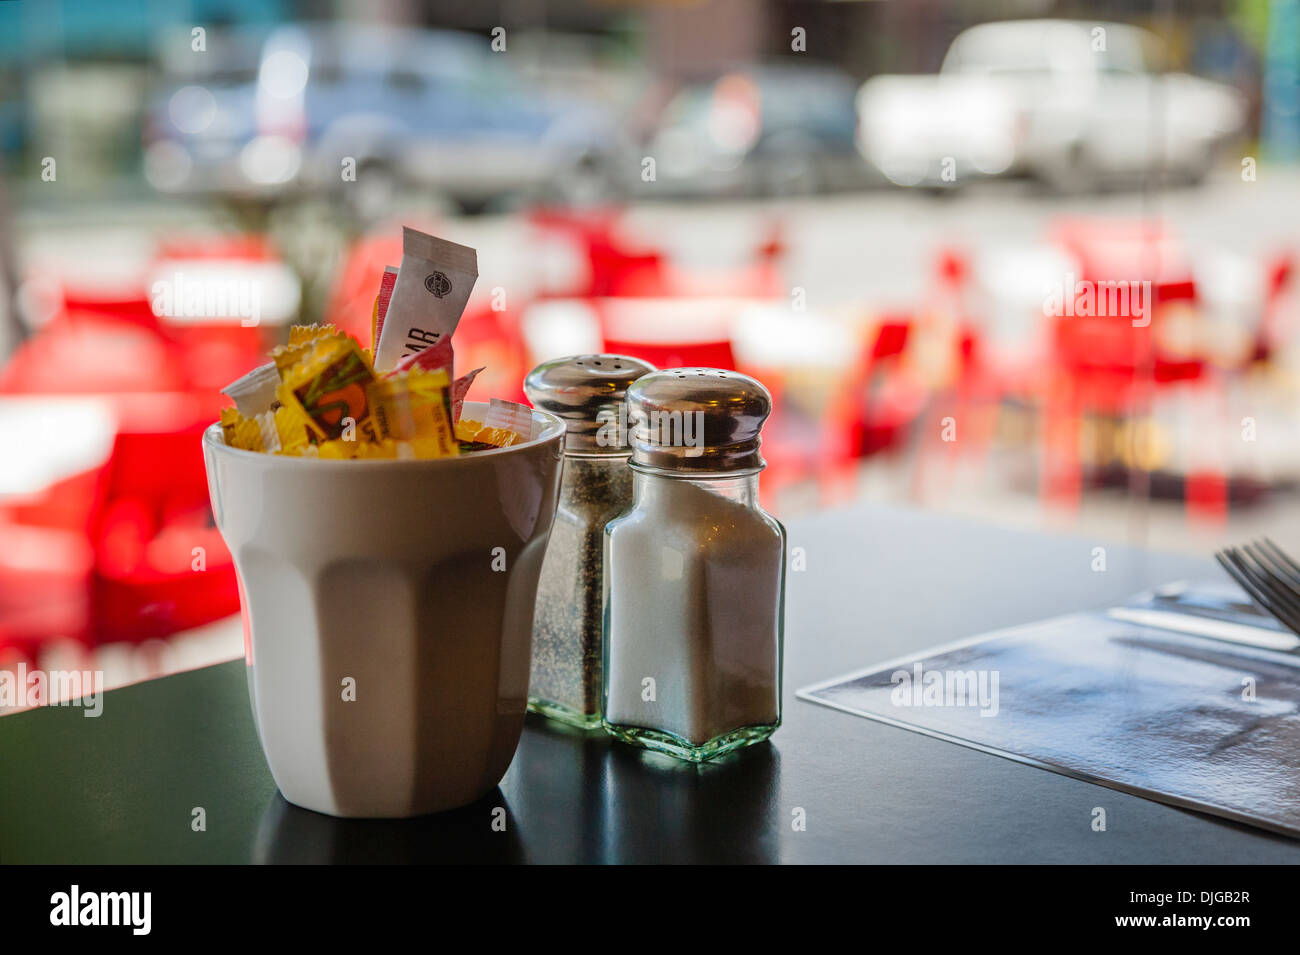 Looking out of a cafe window to the street and tables and chairs outside. Salt and pepper and packets of sugar on a table. Stock Photo